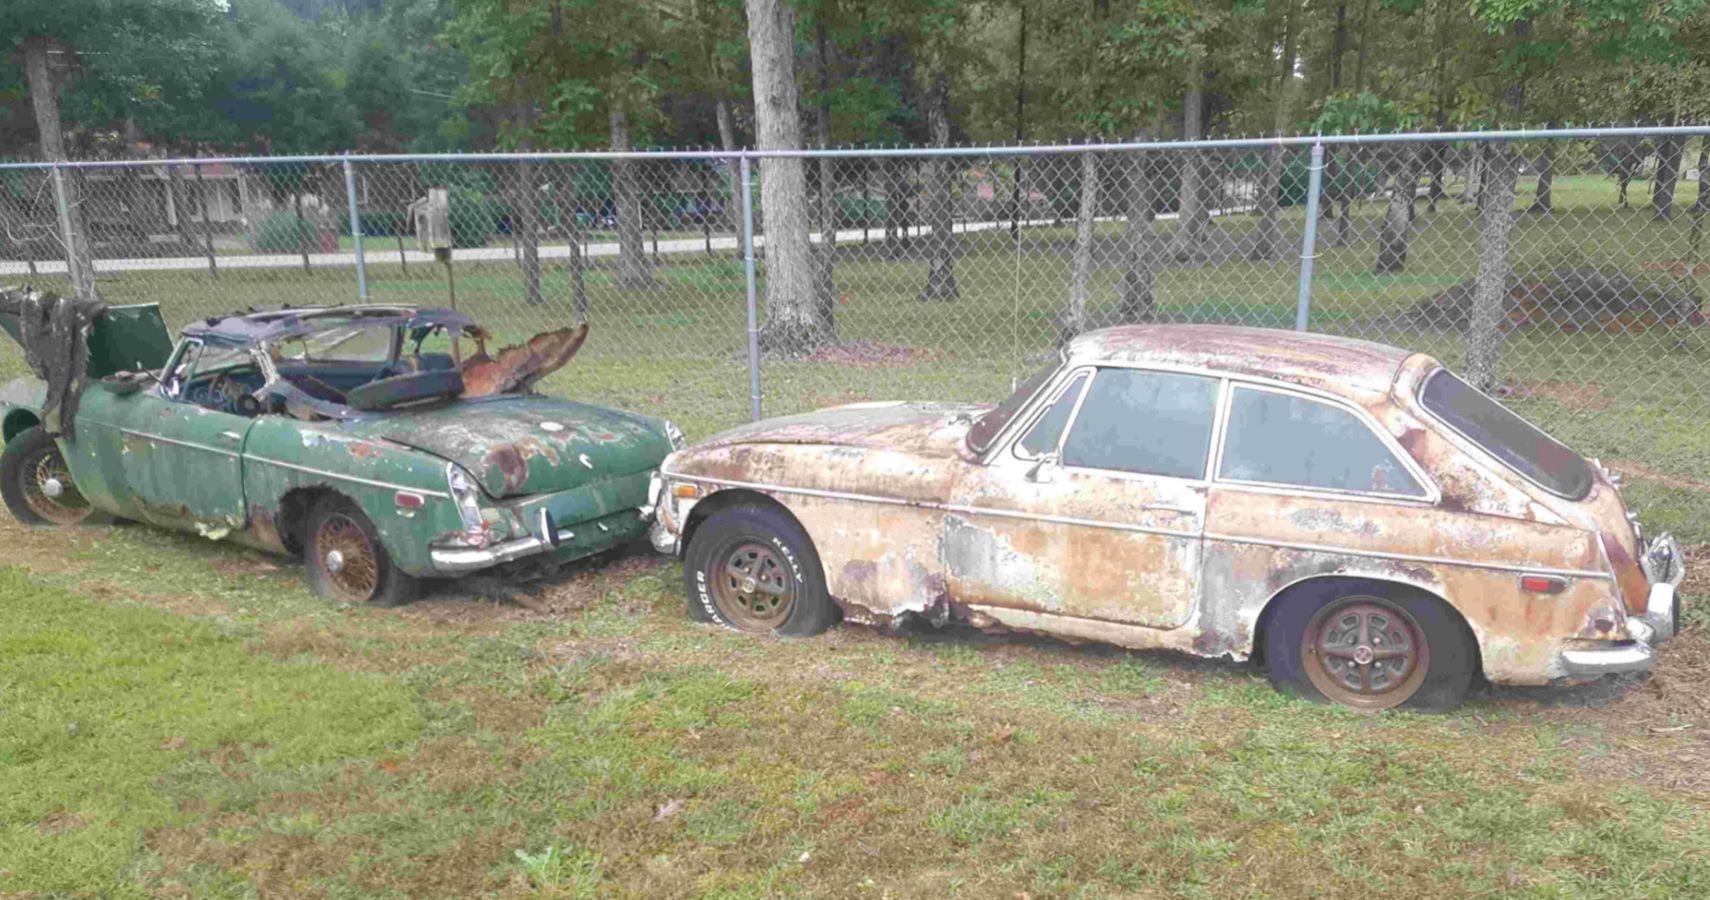 Two rusted MG sedans found buried on Georgian rural property